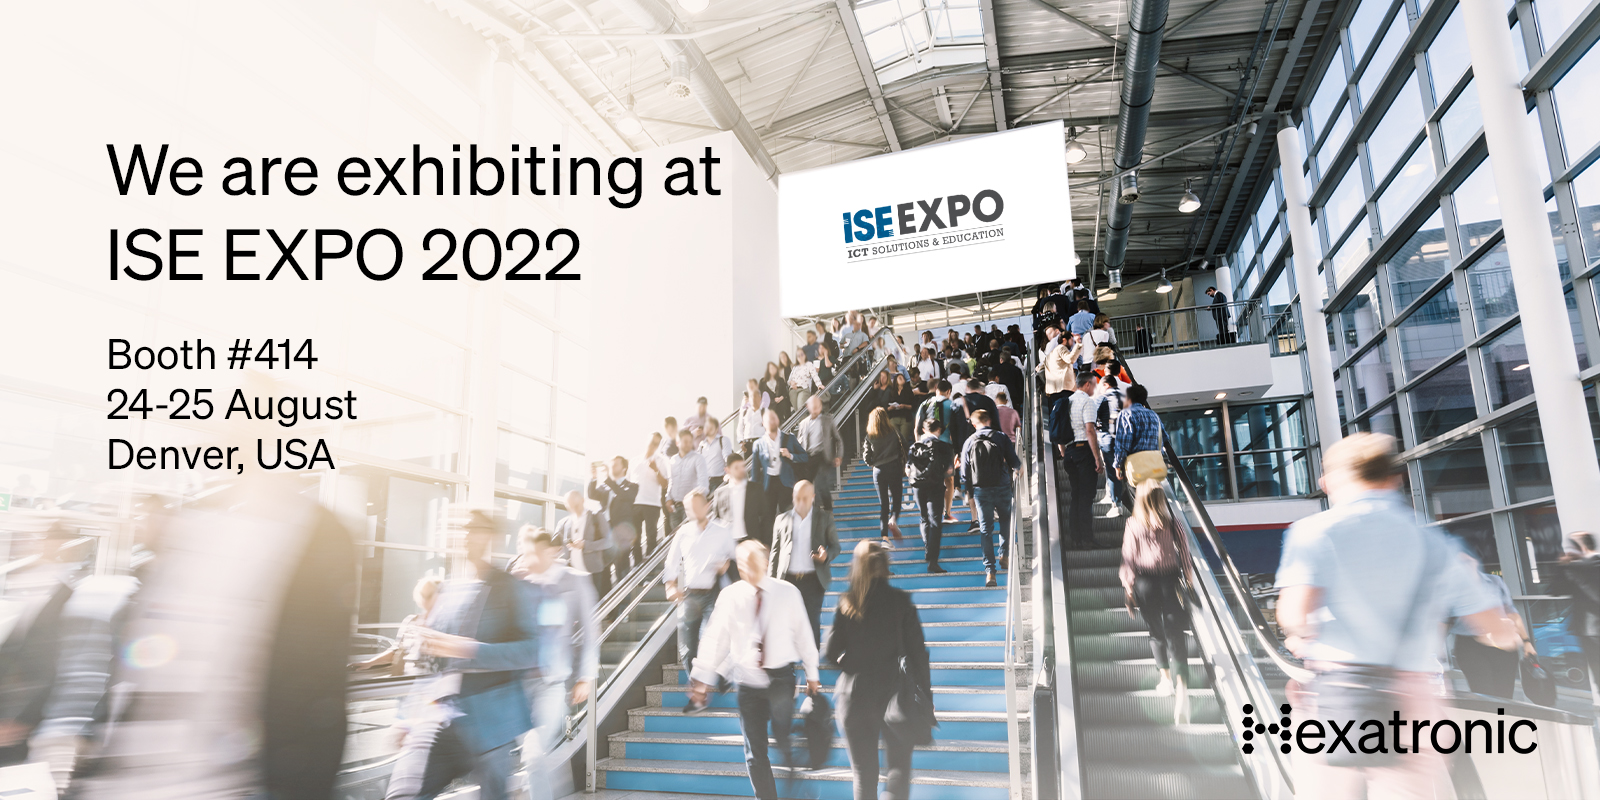 Hexatronic at ISE EXPO 2022